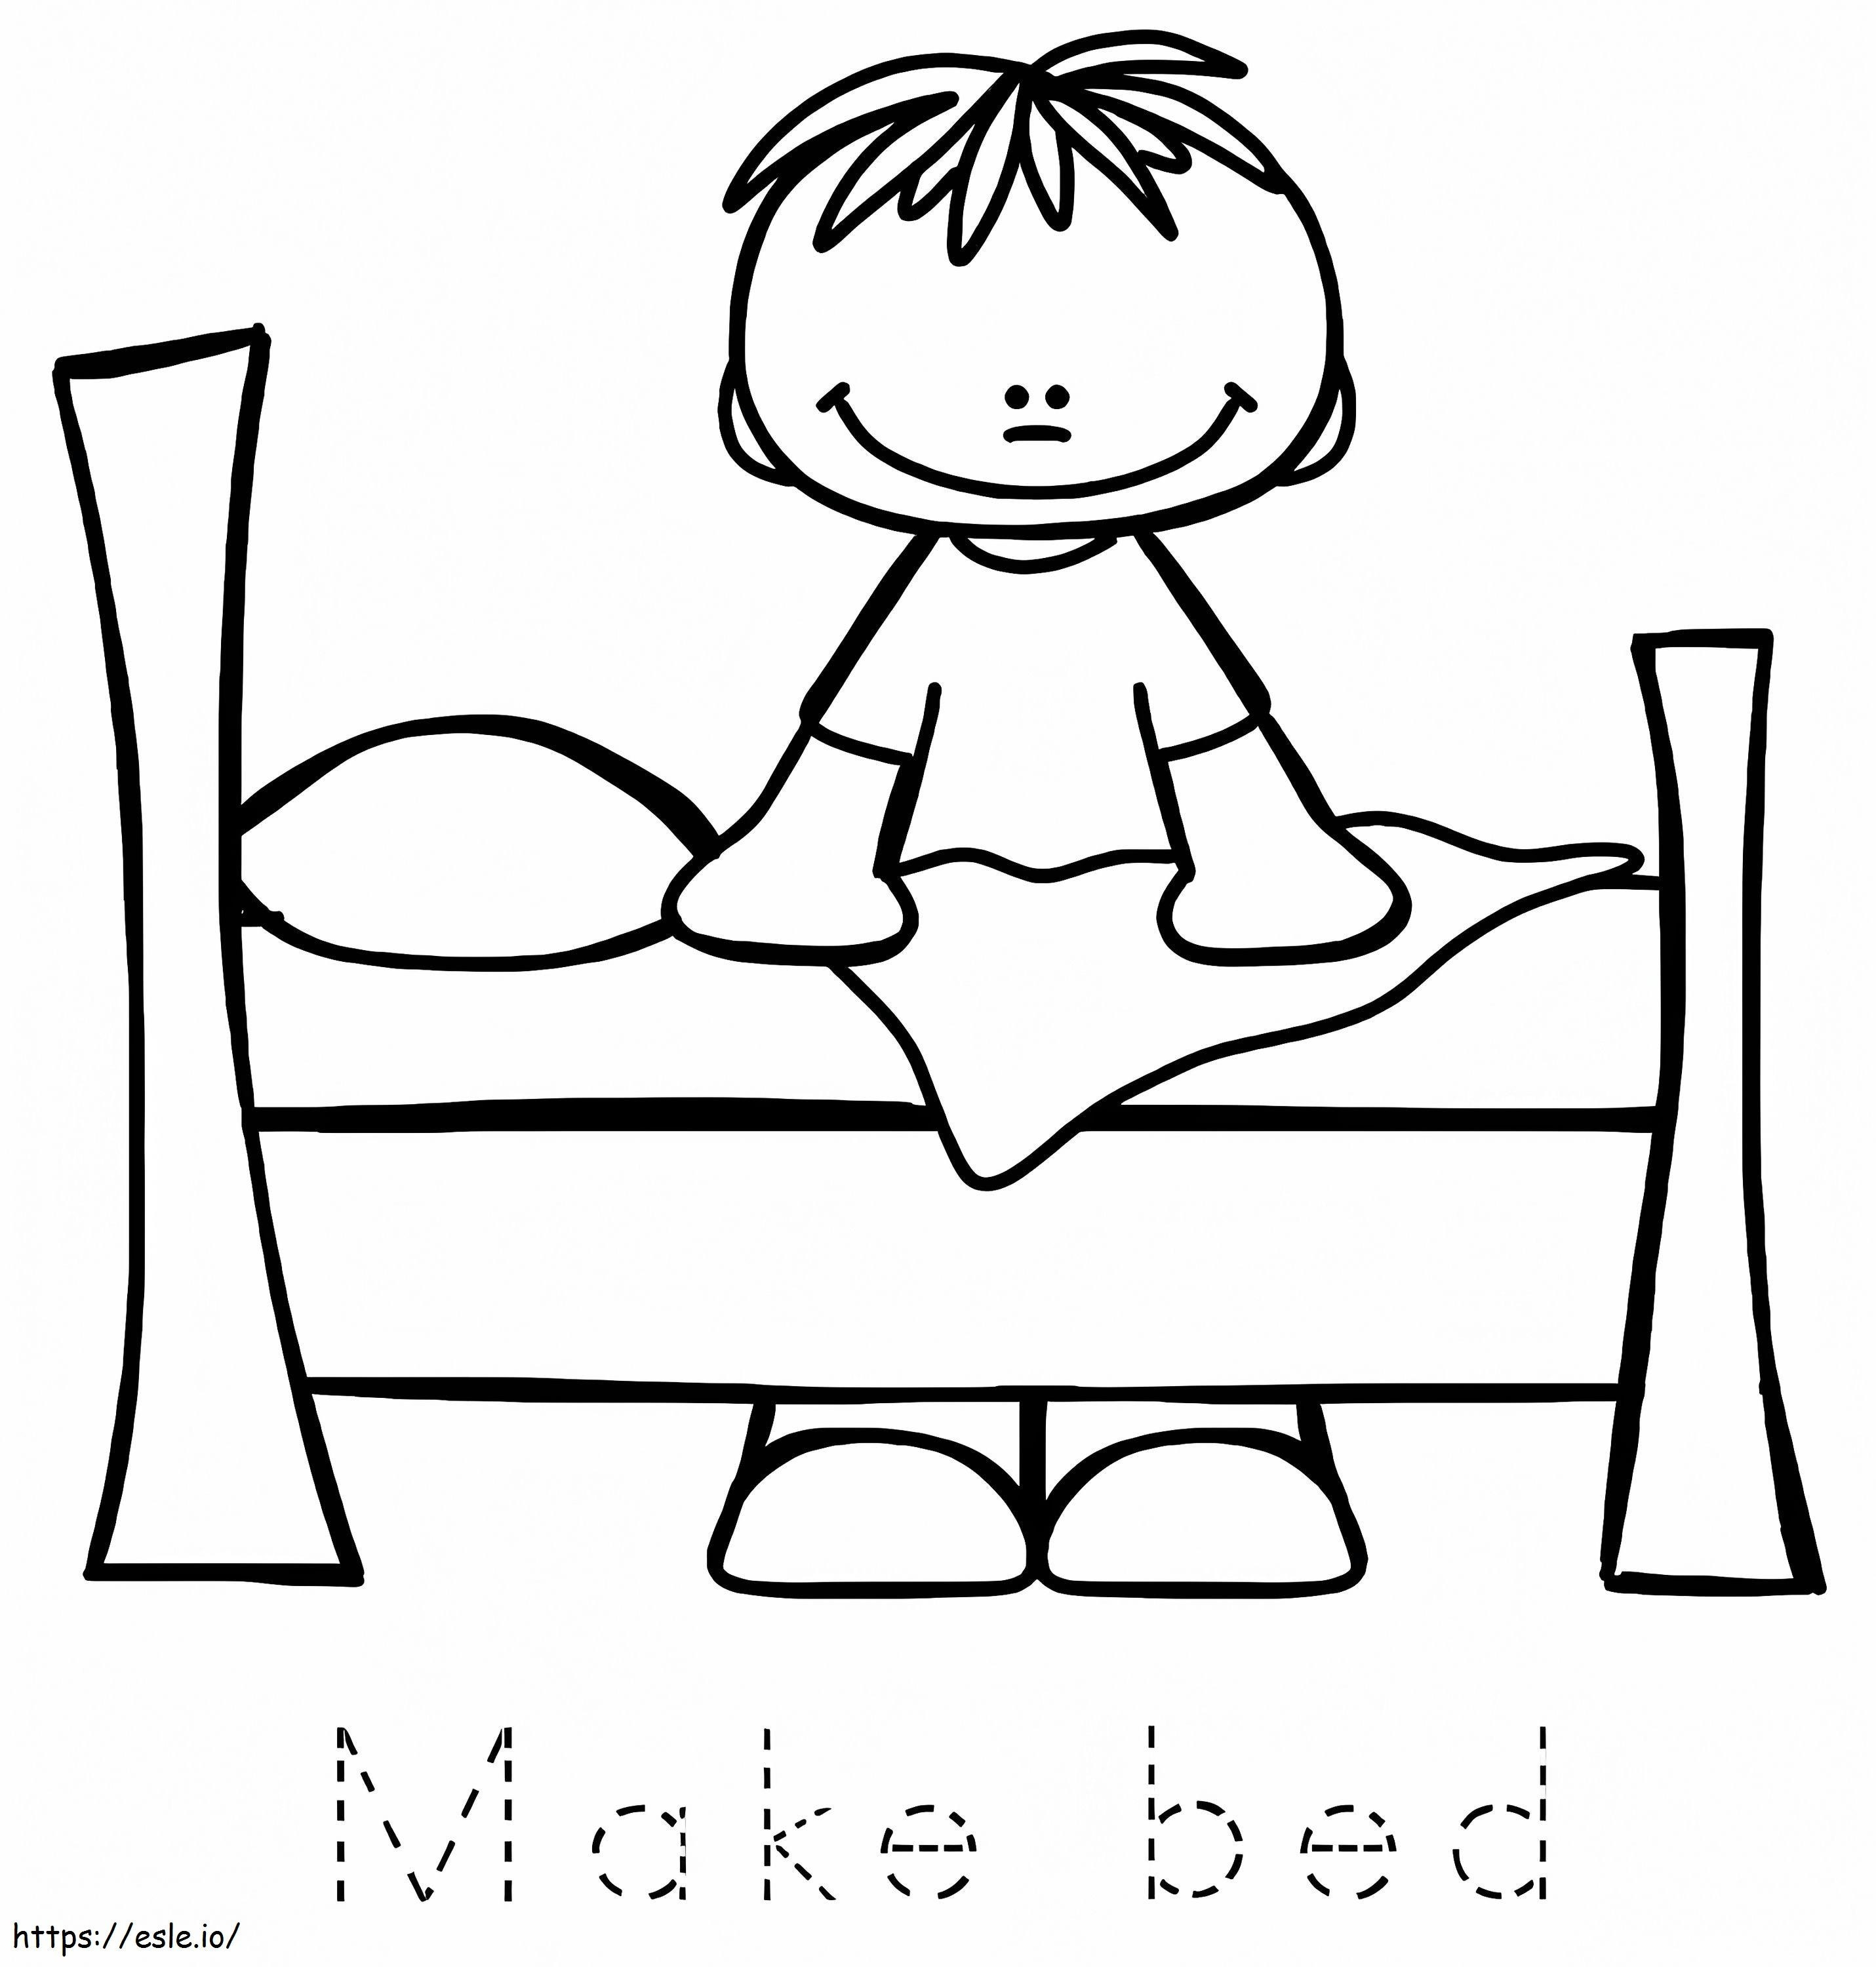 Make Bed coloring page